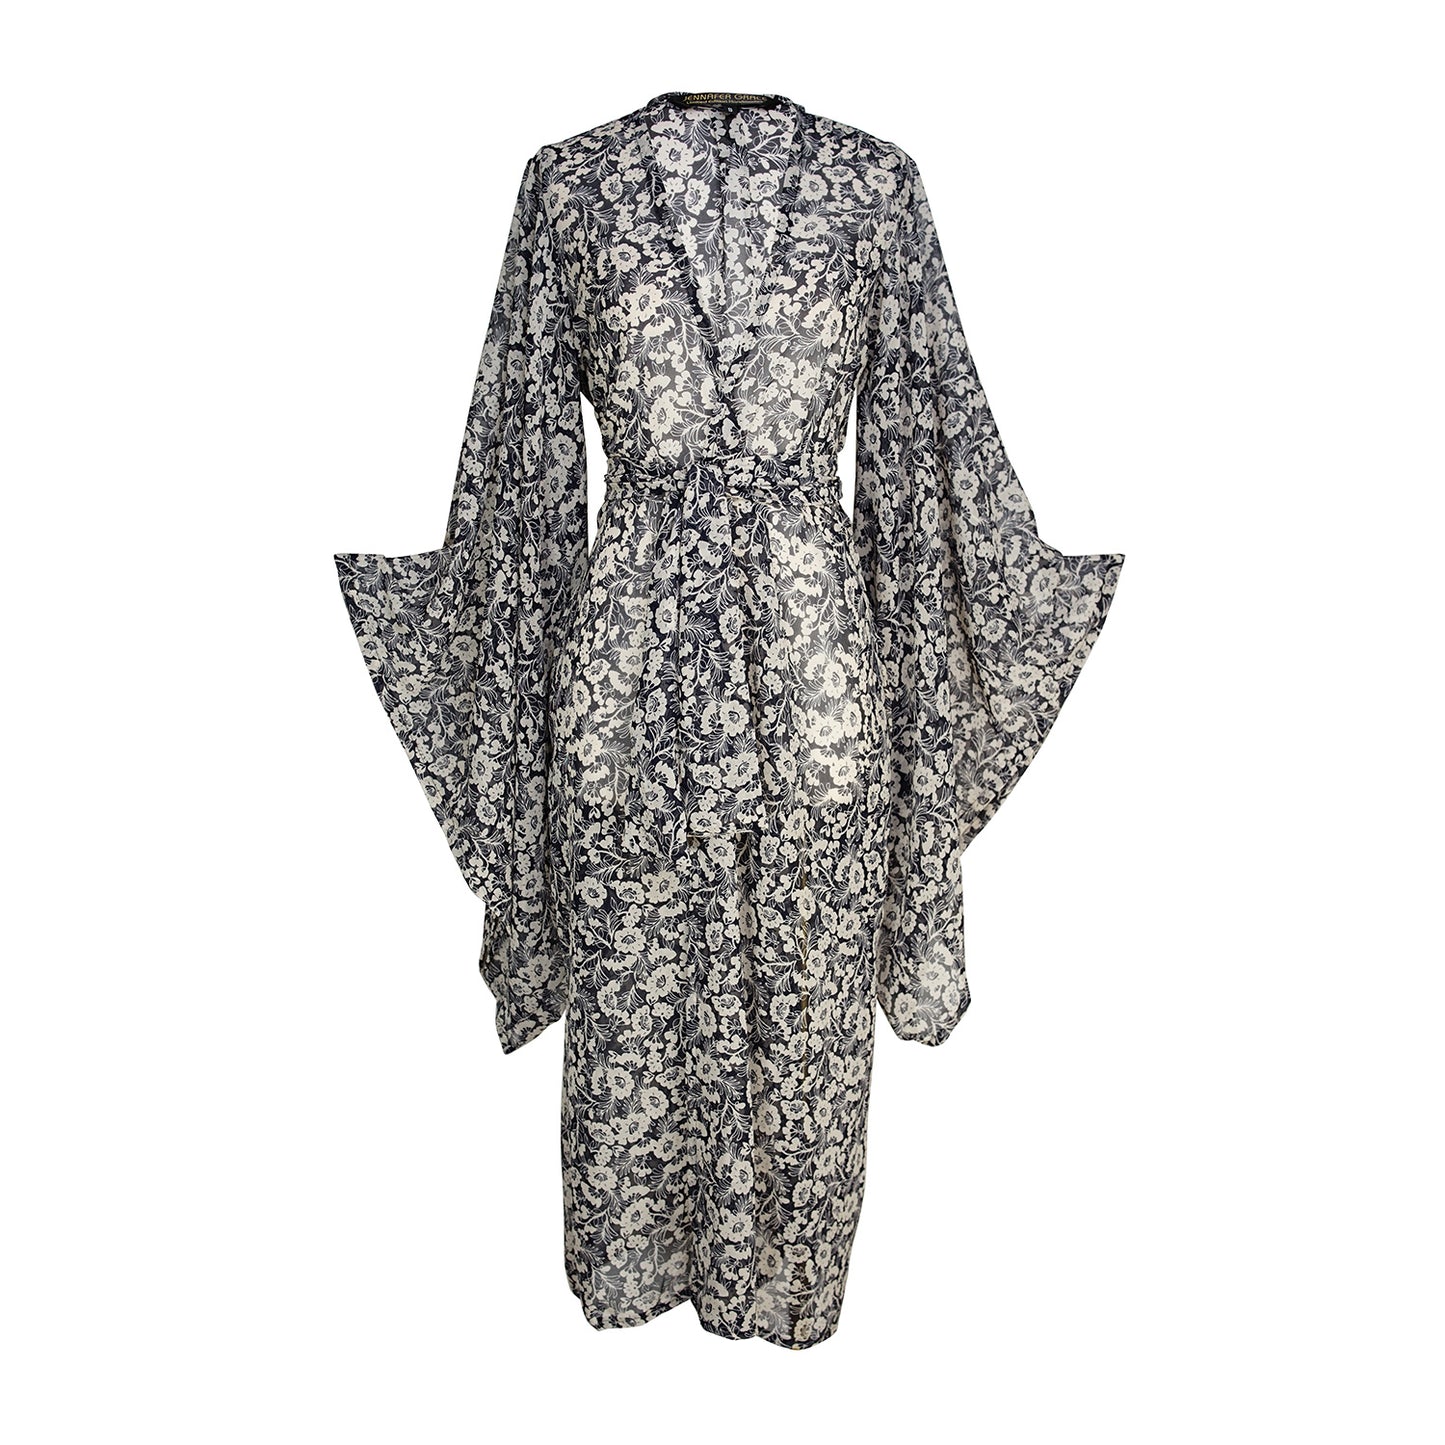 A white and dark blue floral patterned kimono robe featuring long, wide, rectangular sleeves, a full-length cut, deep pockets, and a matching tie belt for an optional cinched waist.